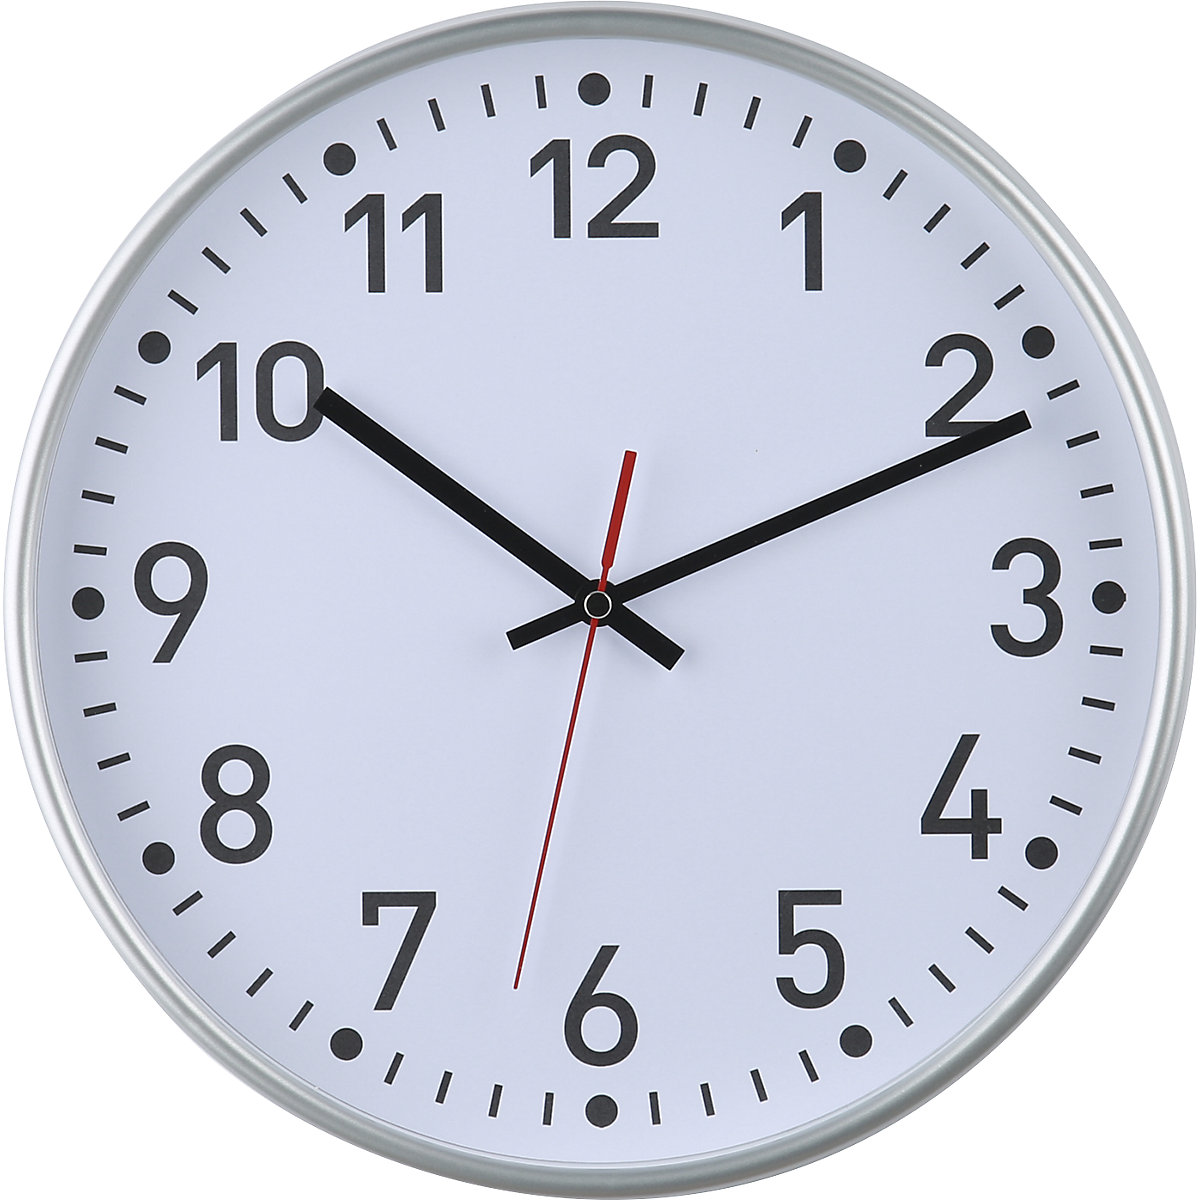 Wall clock, radio synchronised time keeping mechanism, Ø 300 mm, housing silver, clock face white-2